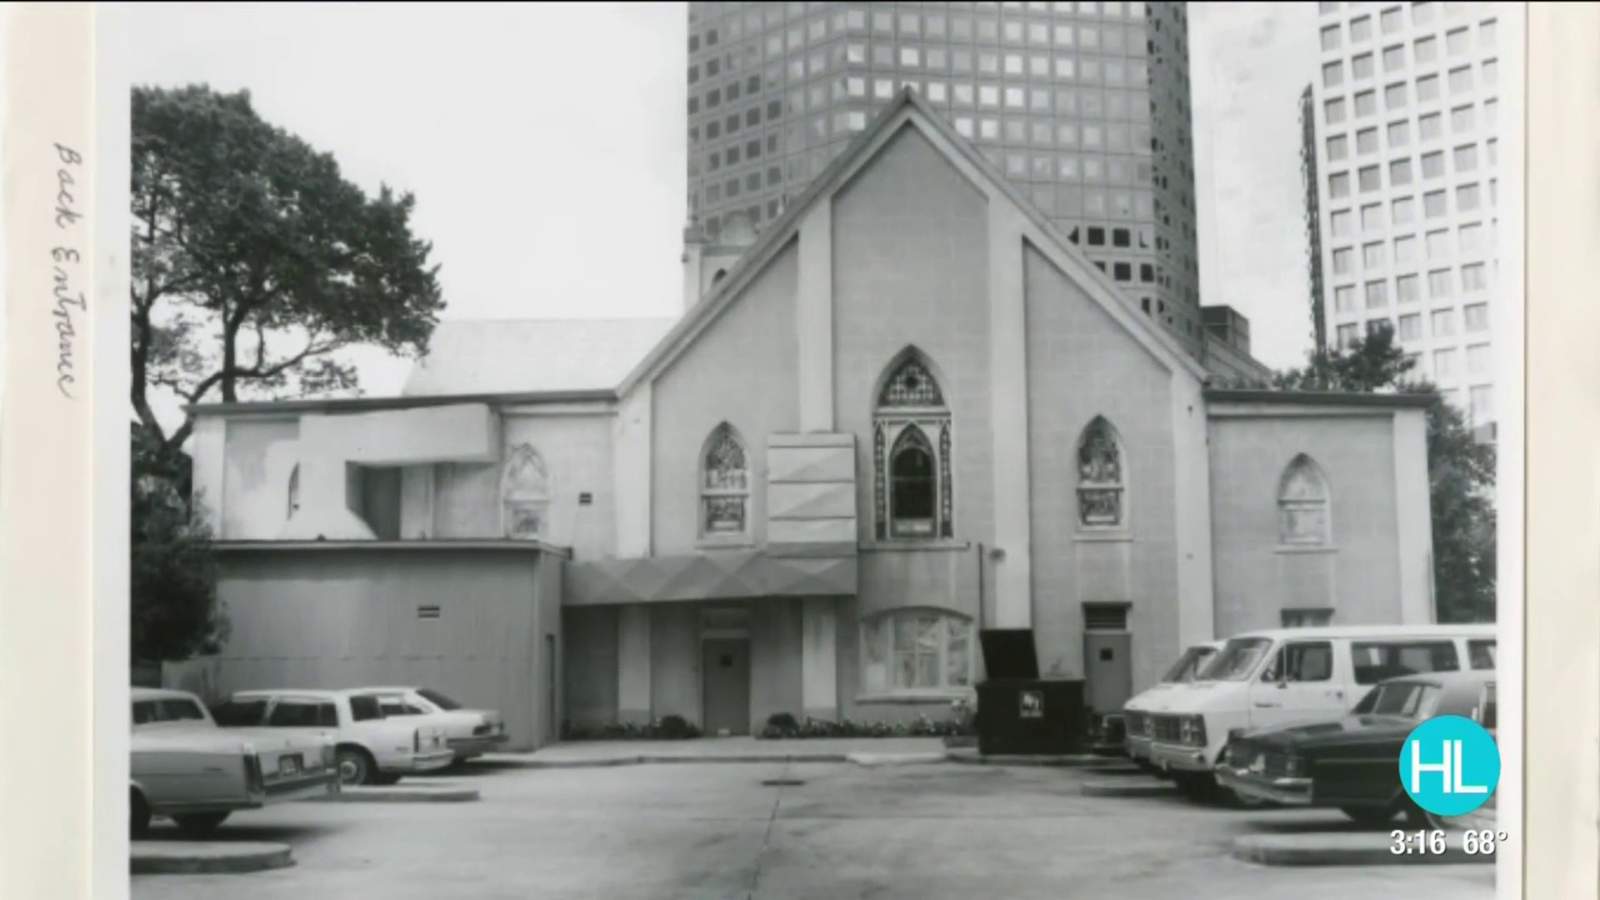 Houston’s Antioch Missionary Baptist Church built by freed slaves in 1866